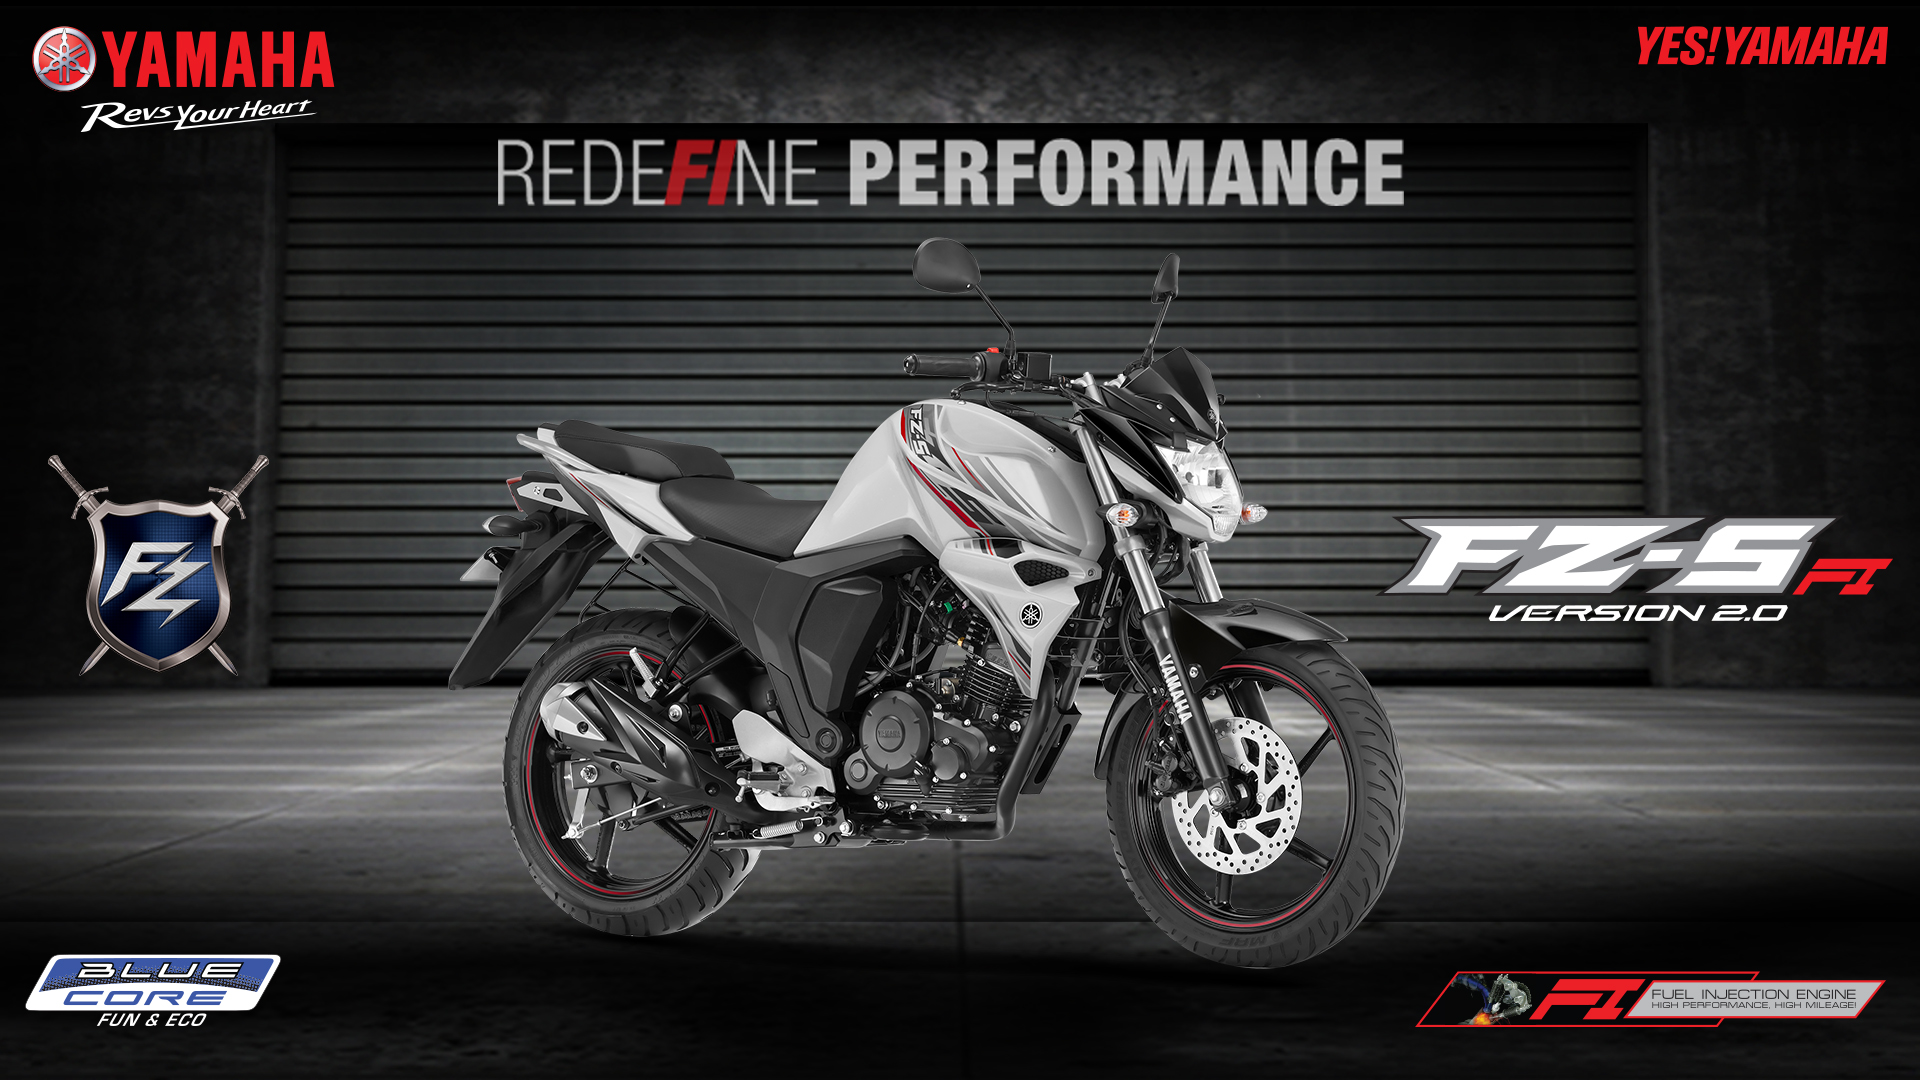 Next generation Yamaha FZ-S FI BS-IV in white colour